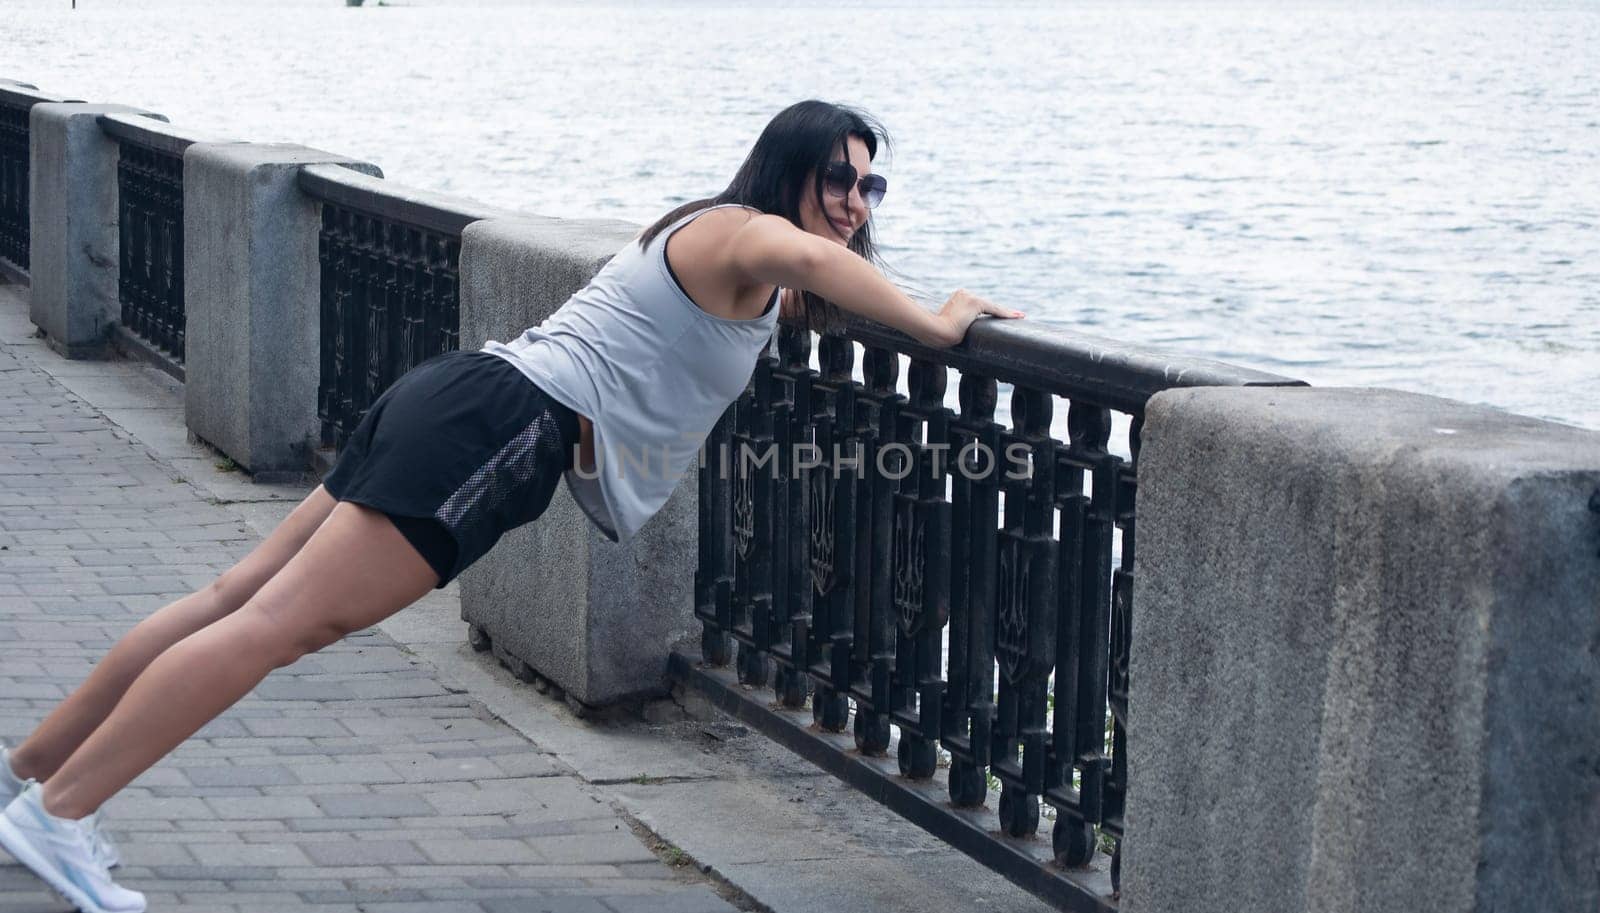 The girl is slim, tall and athletic in short shorts, doing push-ups on the street in the summer near the river. Strengthening the muscles of the arms and chest. Sports concept.